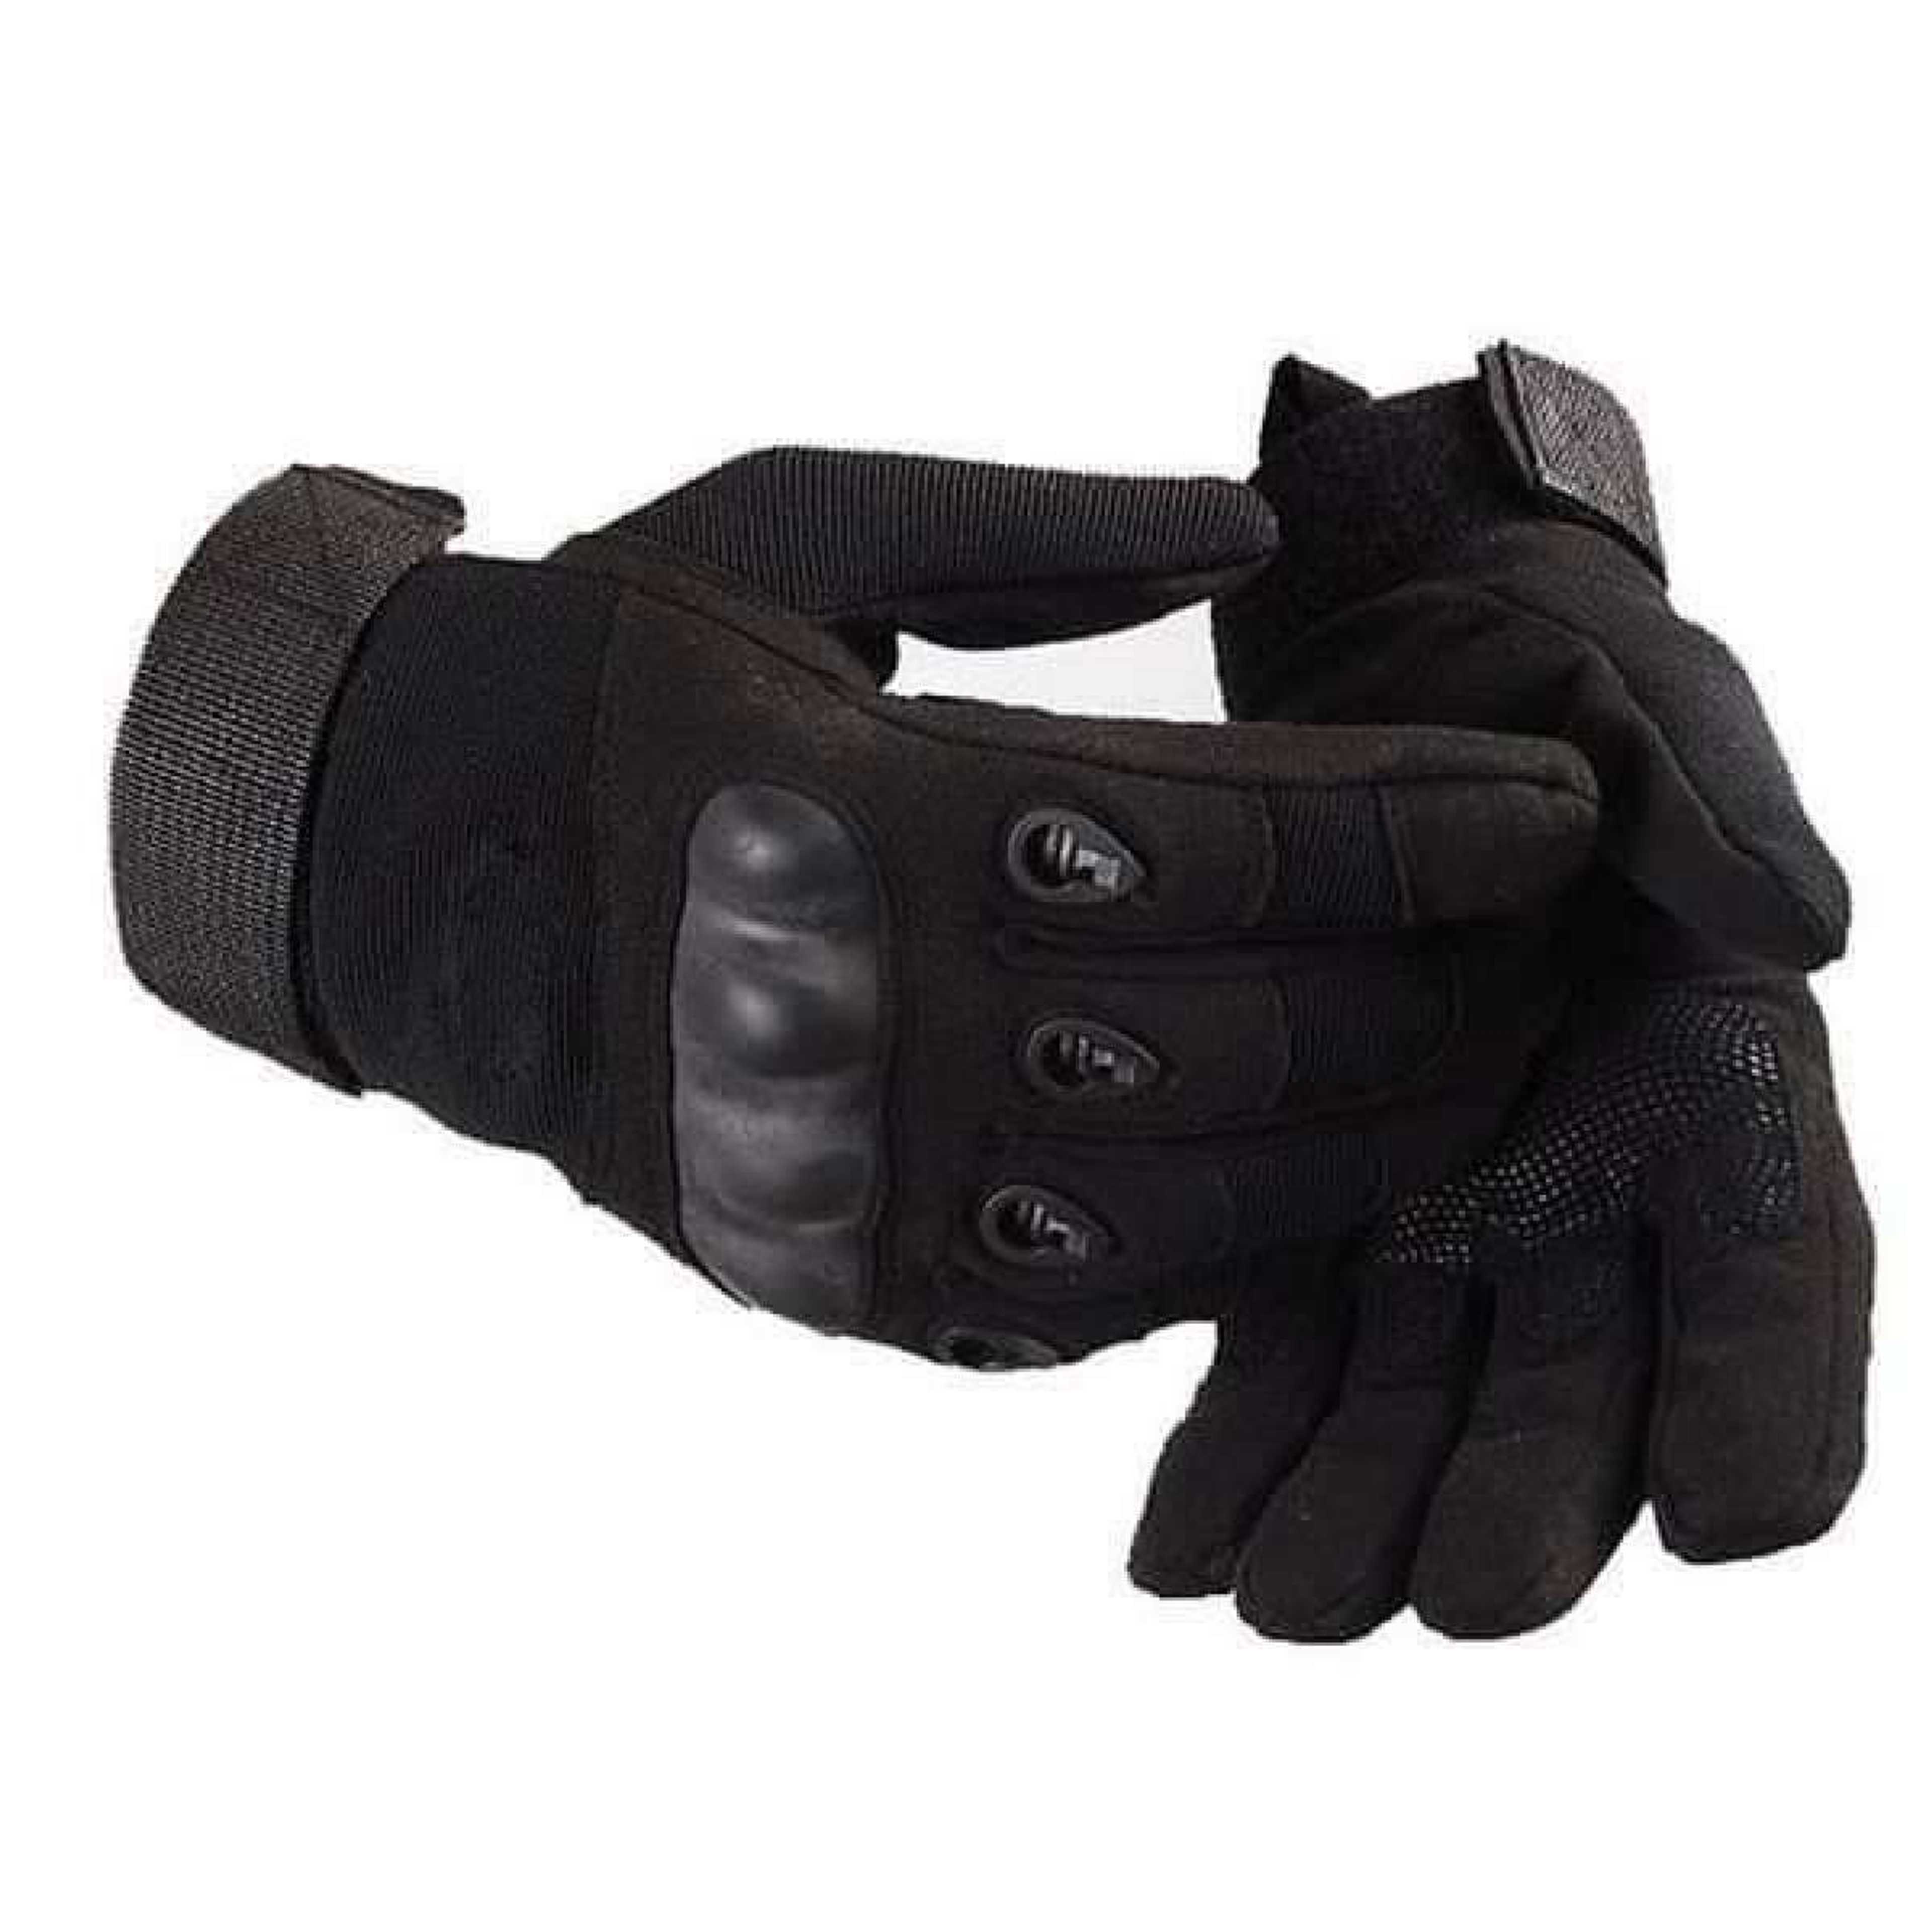 Tacticl Oakley Gloves